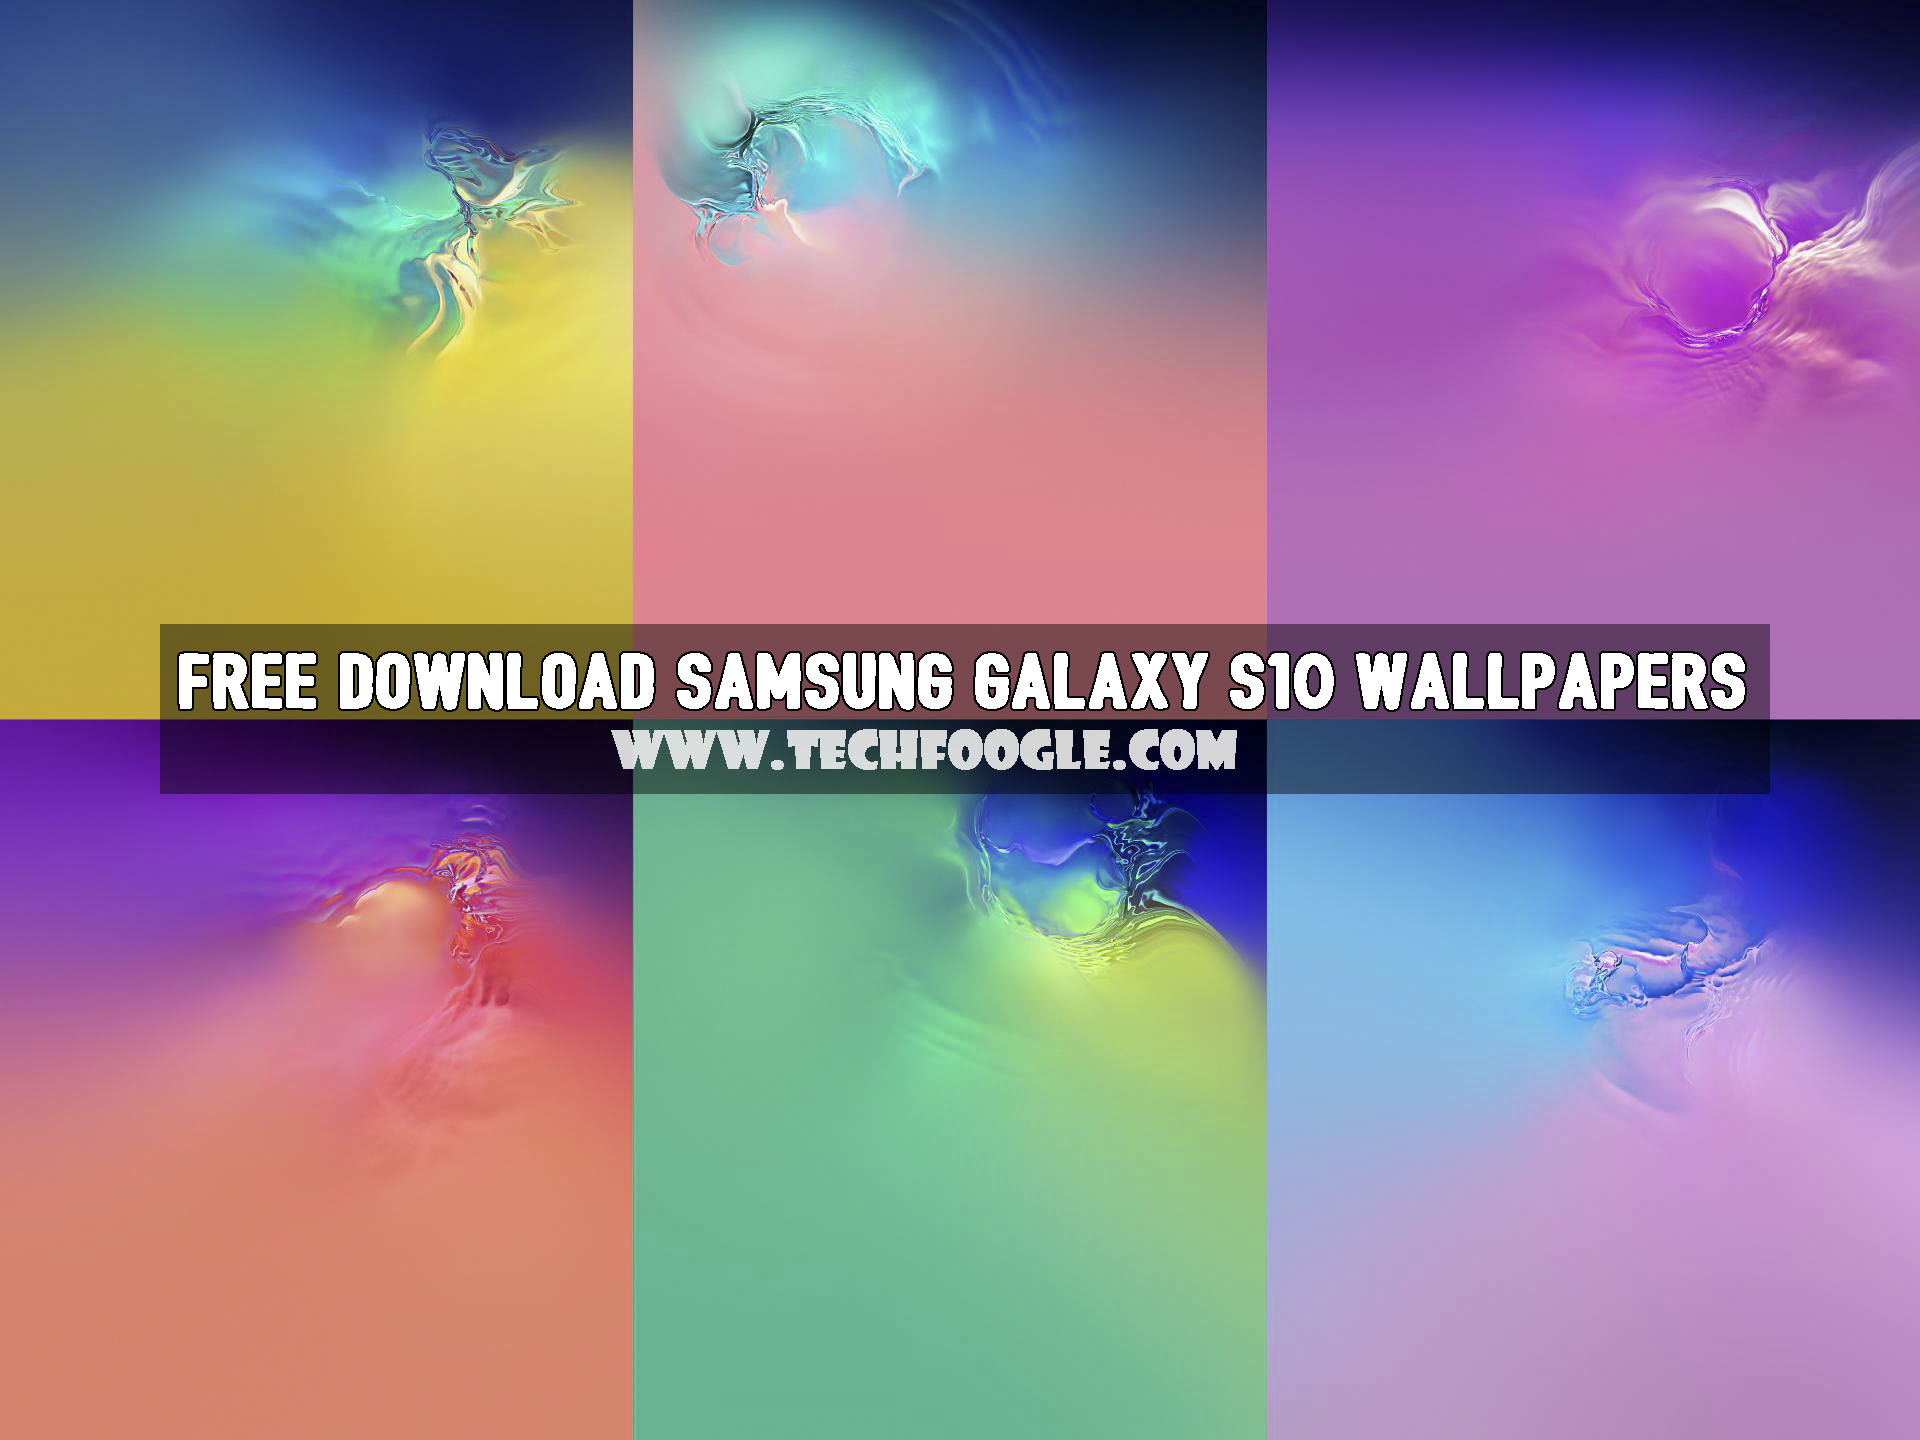 Free Download Samsung Galaxy S10 Stock Wallpapers - TechFoogle